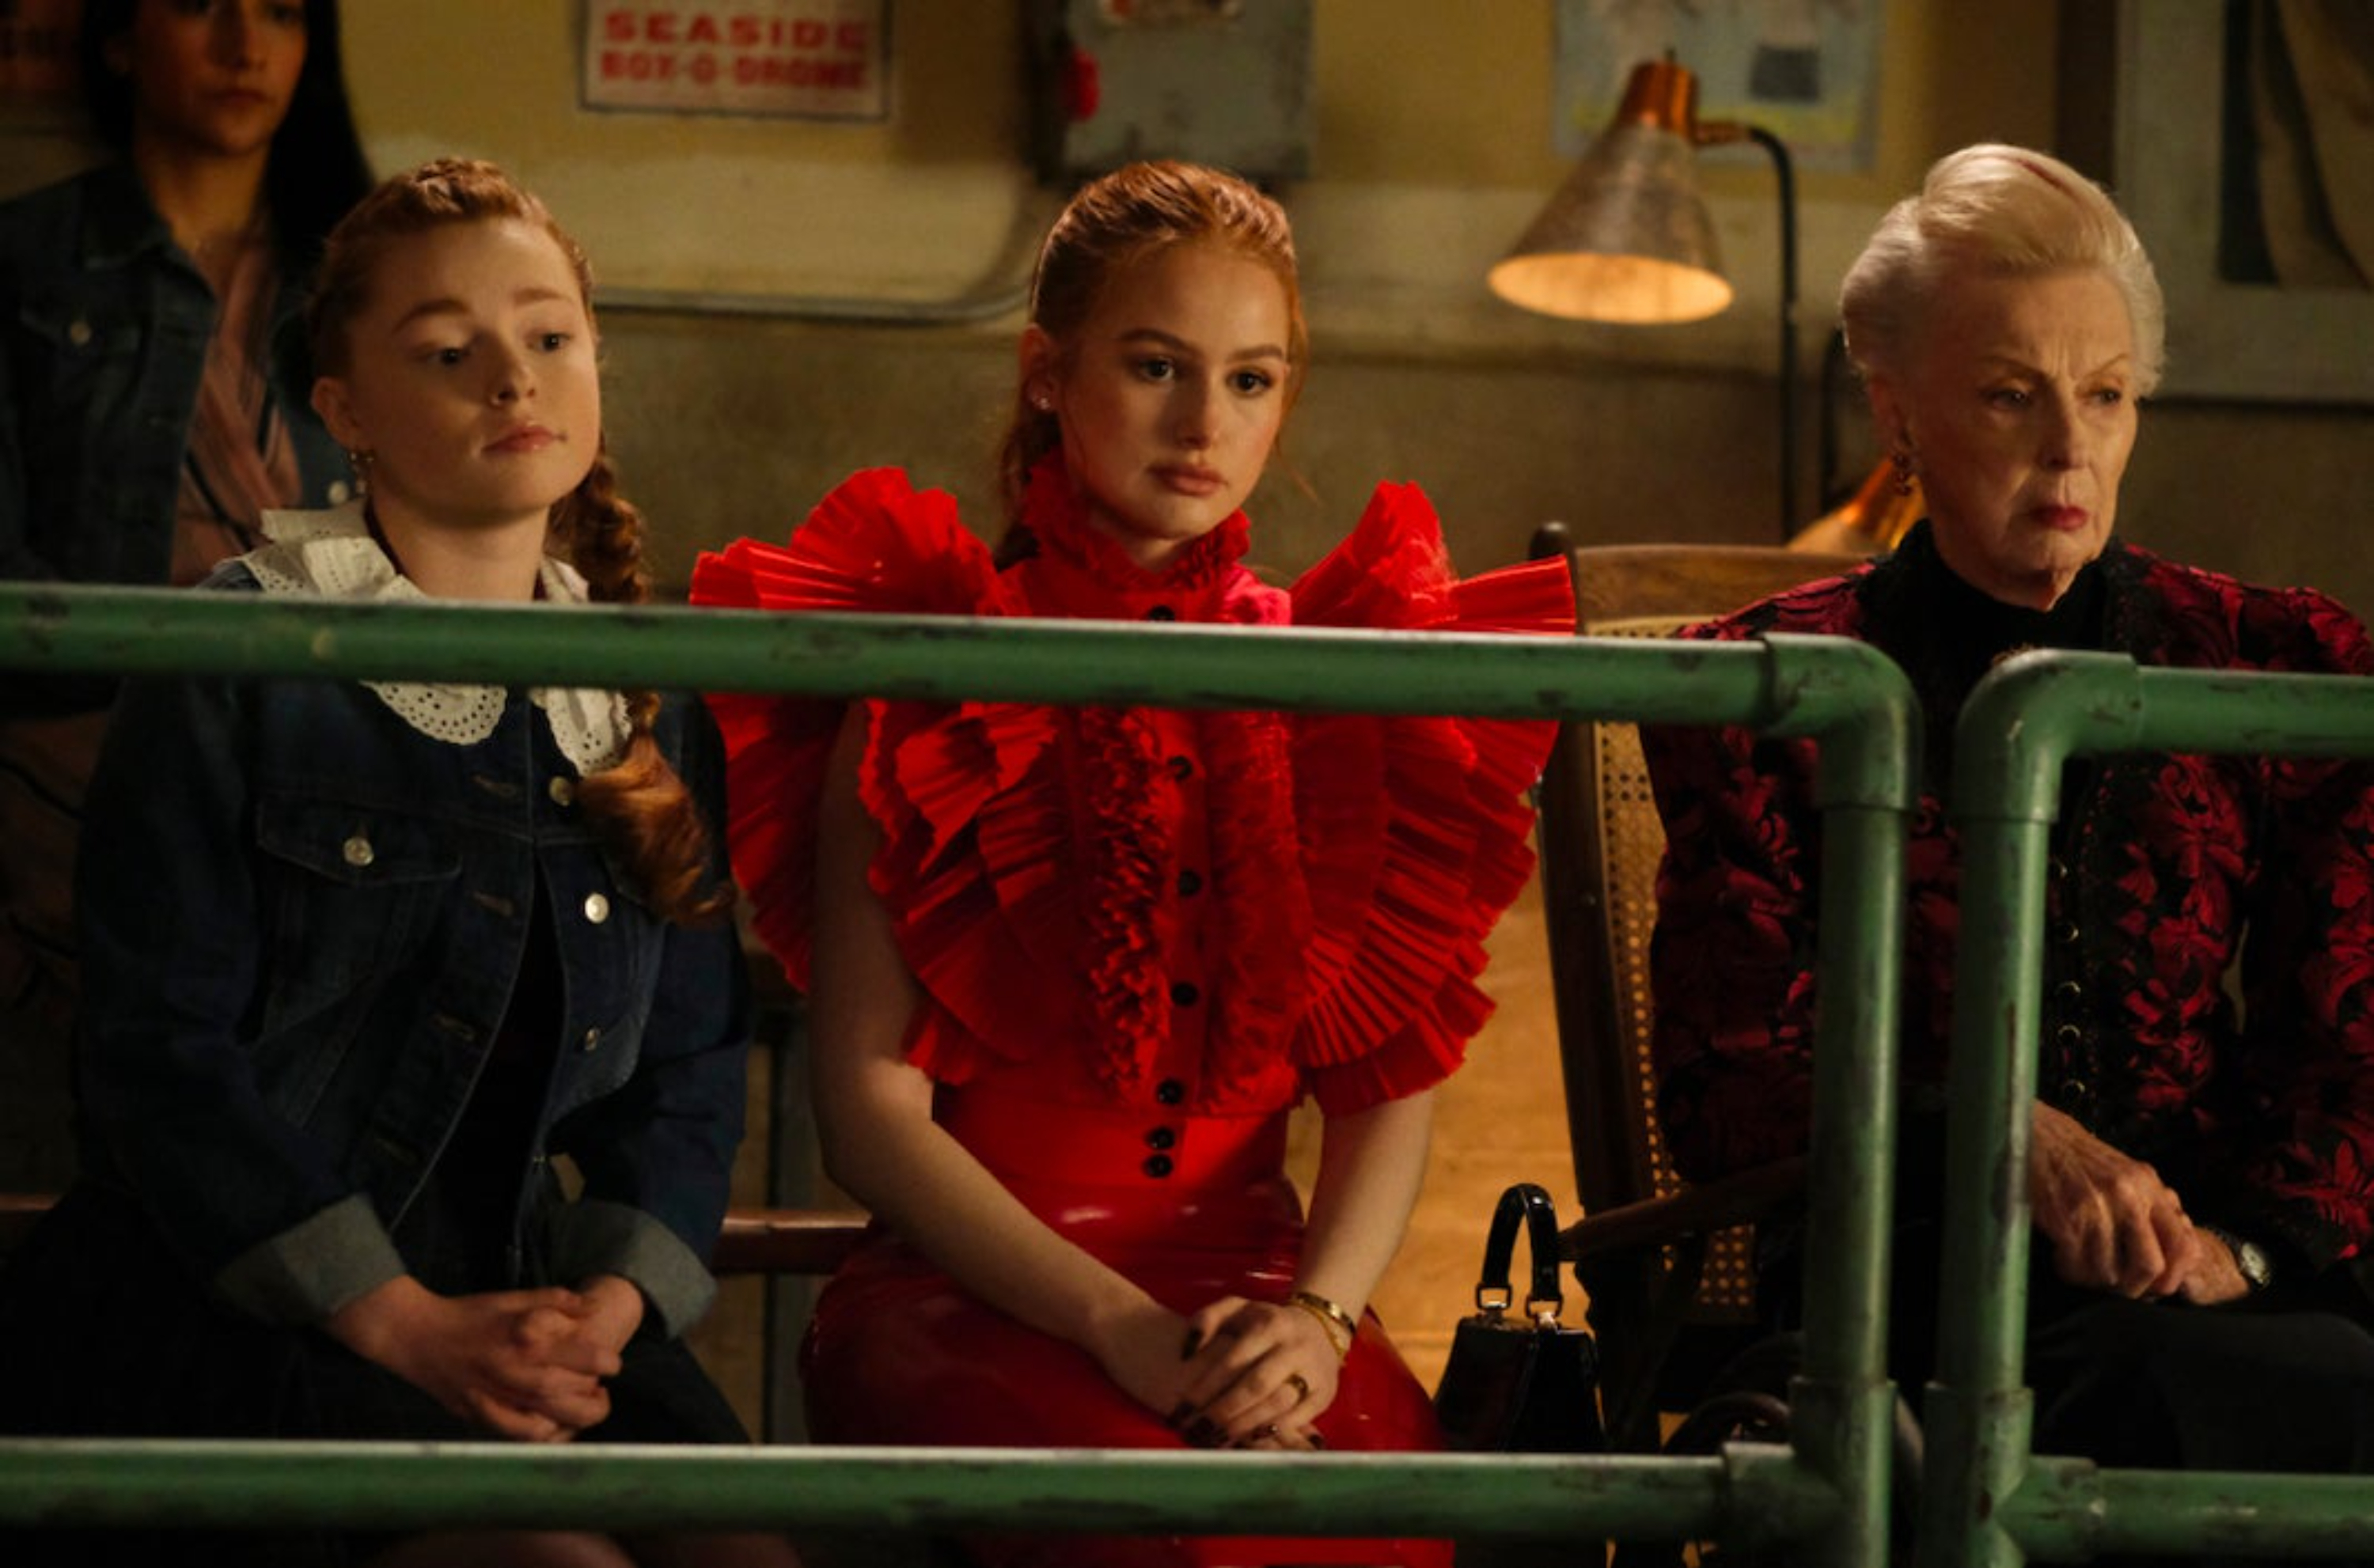 Three women sit behind a green metal fence. On the left is a redhead teenage girl, wearing blue denim. In the middle is a young redhead woman, wearing a red outfit. On the right is an elderly woman in dark red and black clothes.